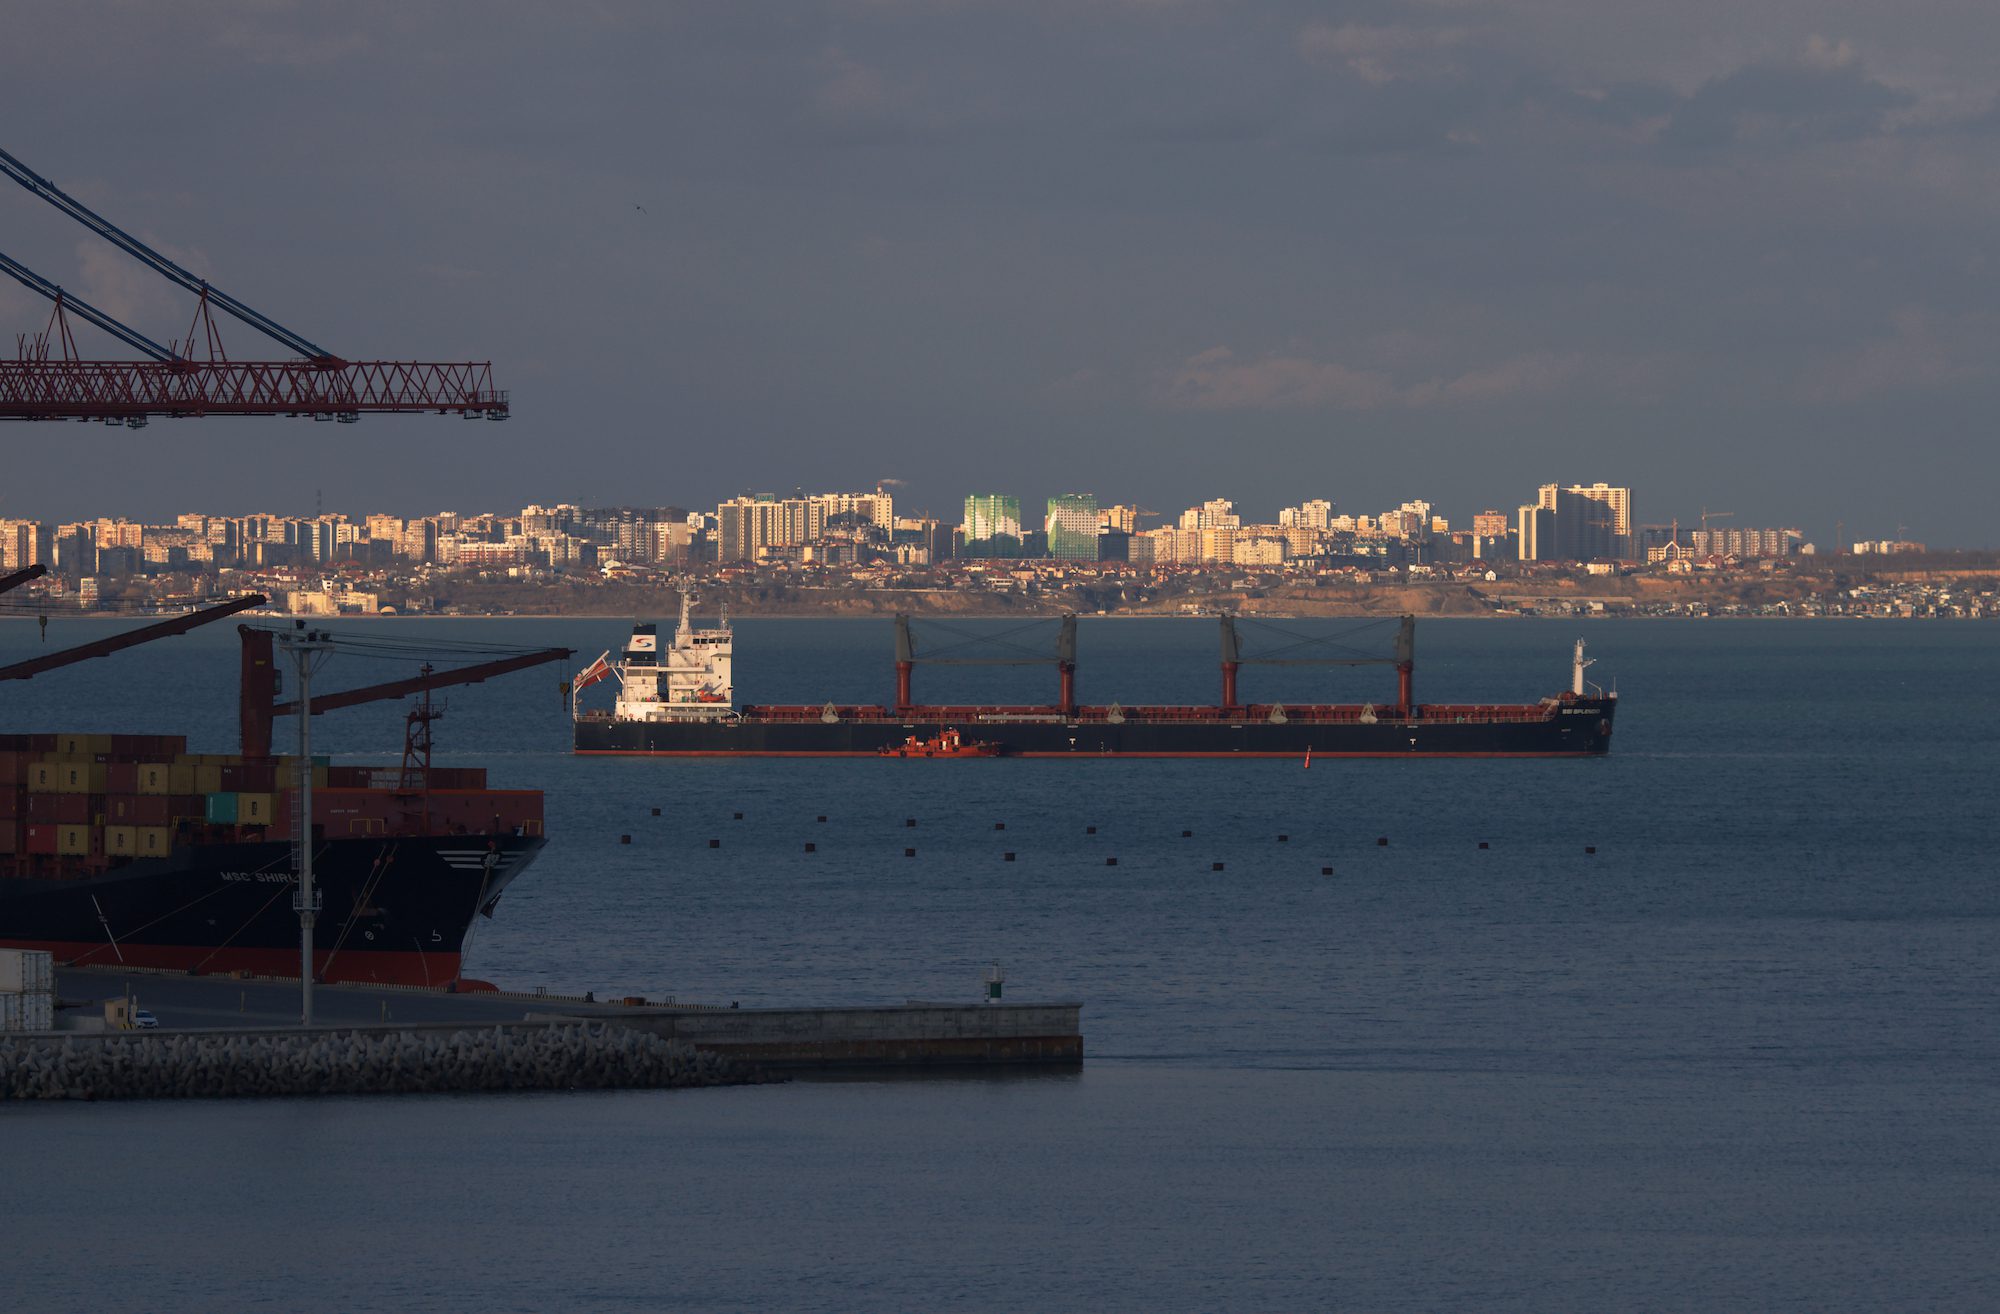 A bulk carrier departs the Port of Odessa prior to the war. Image courtesy VolodymyrT / Shutterstock.com